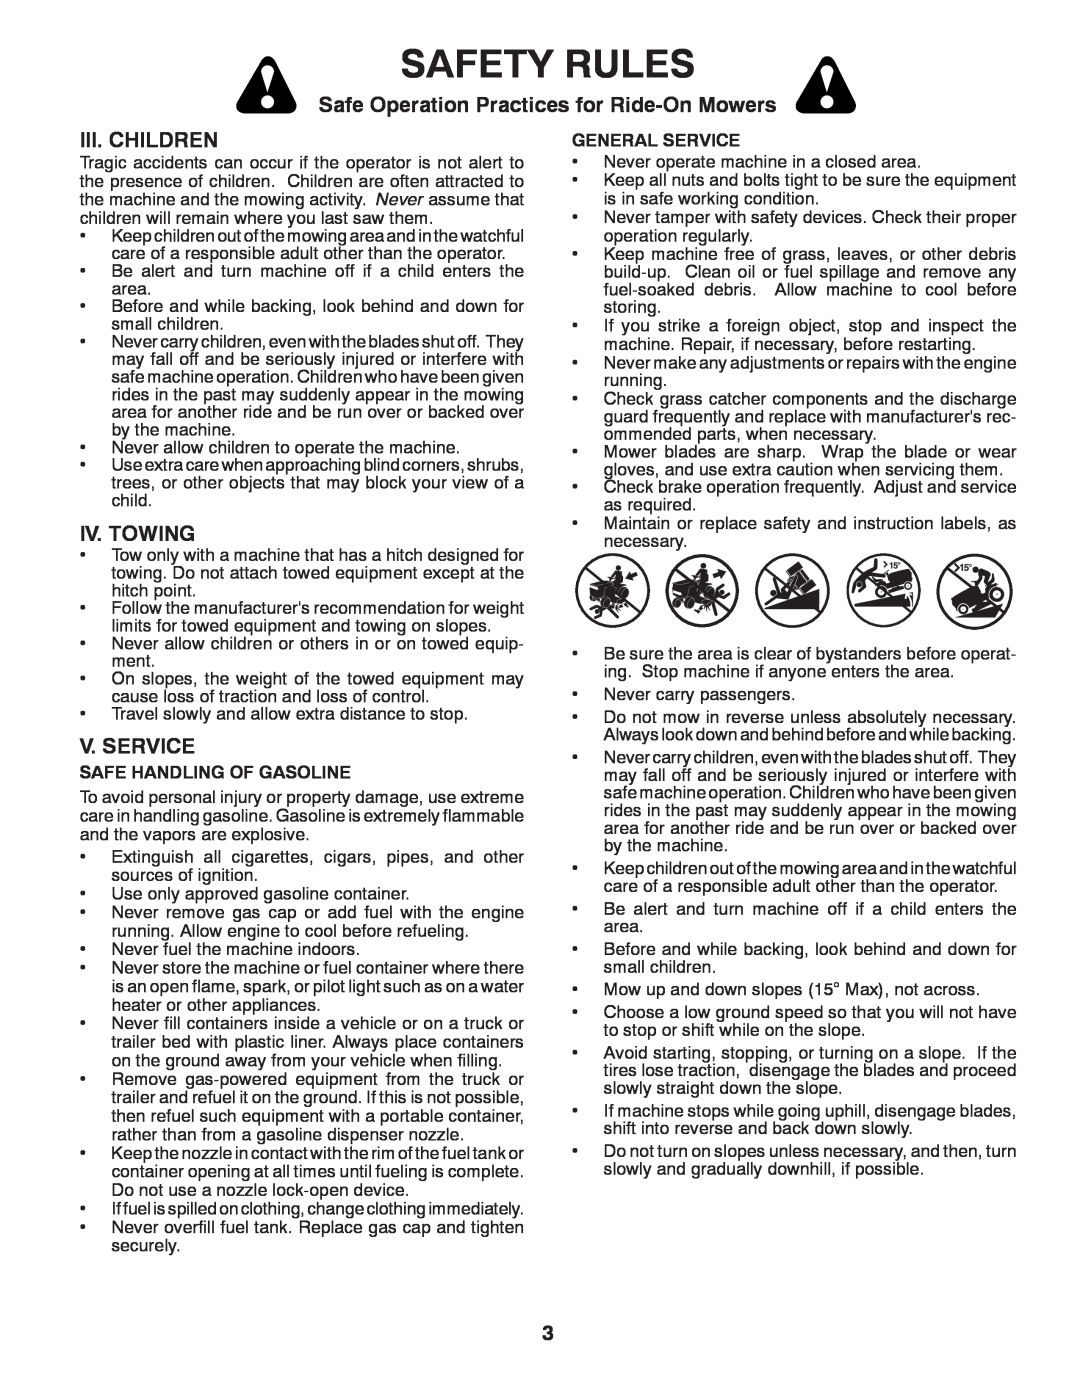 Poulan PBA195H42LT manual Iii. Children, Iv. Towing, V. Service, Safety Rules, Safe Operation Practices for Ride-On Mowers 